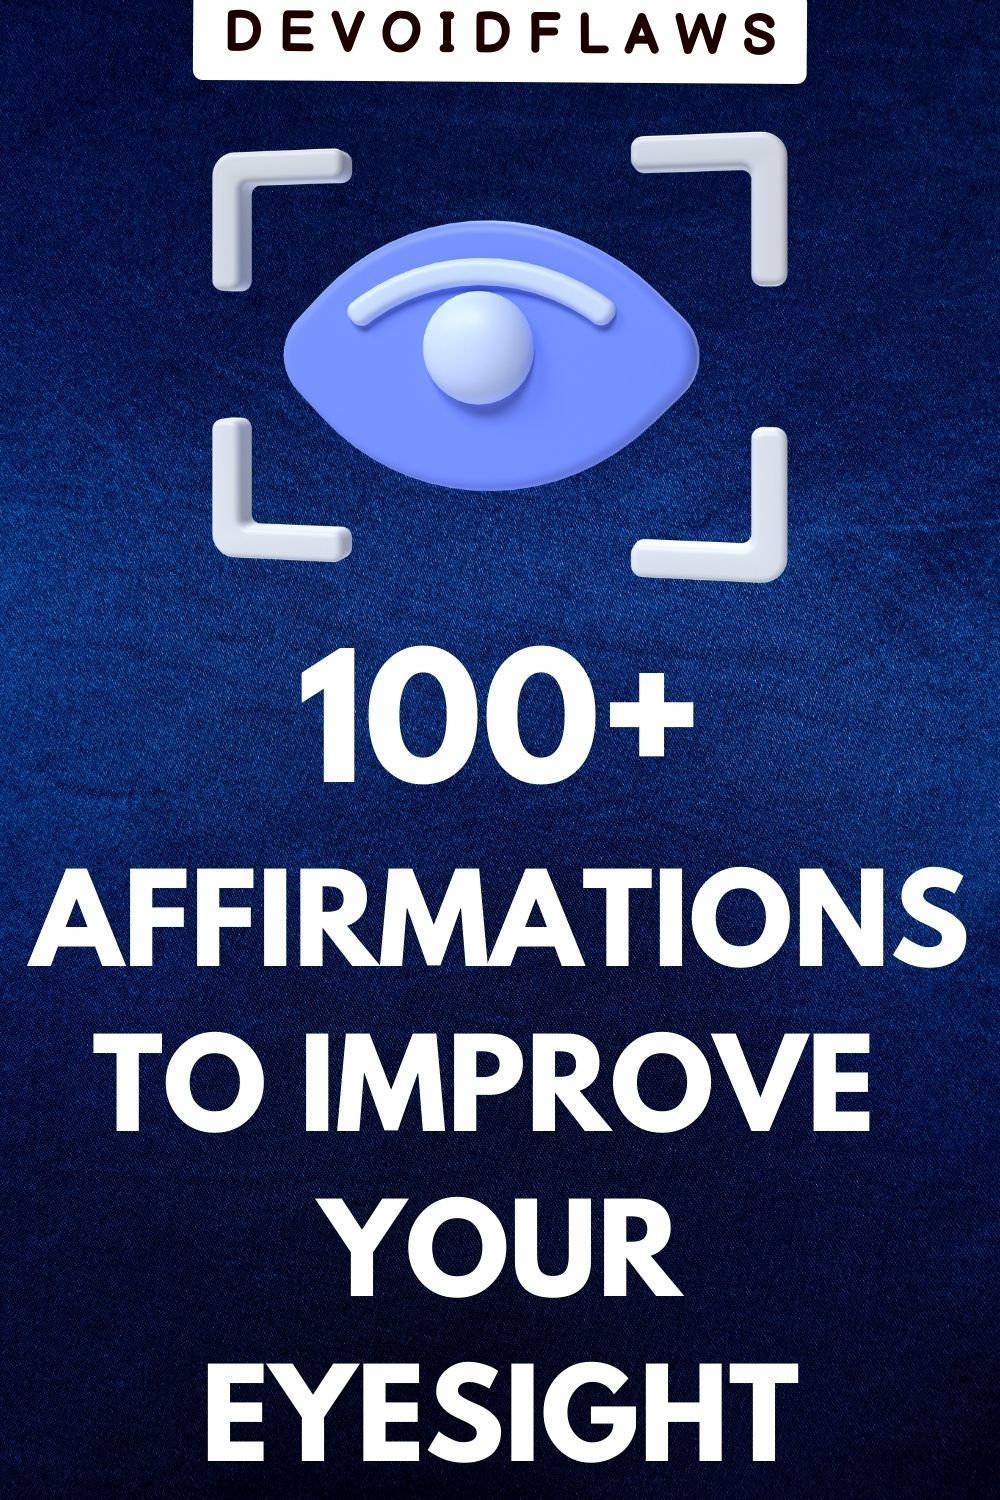 image with text - 100+ affirmations for to improve your eyesight